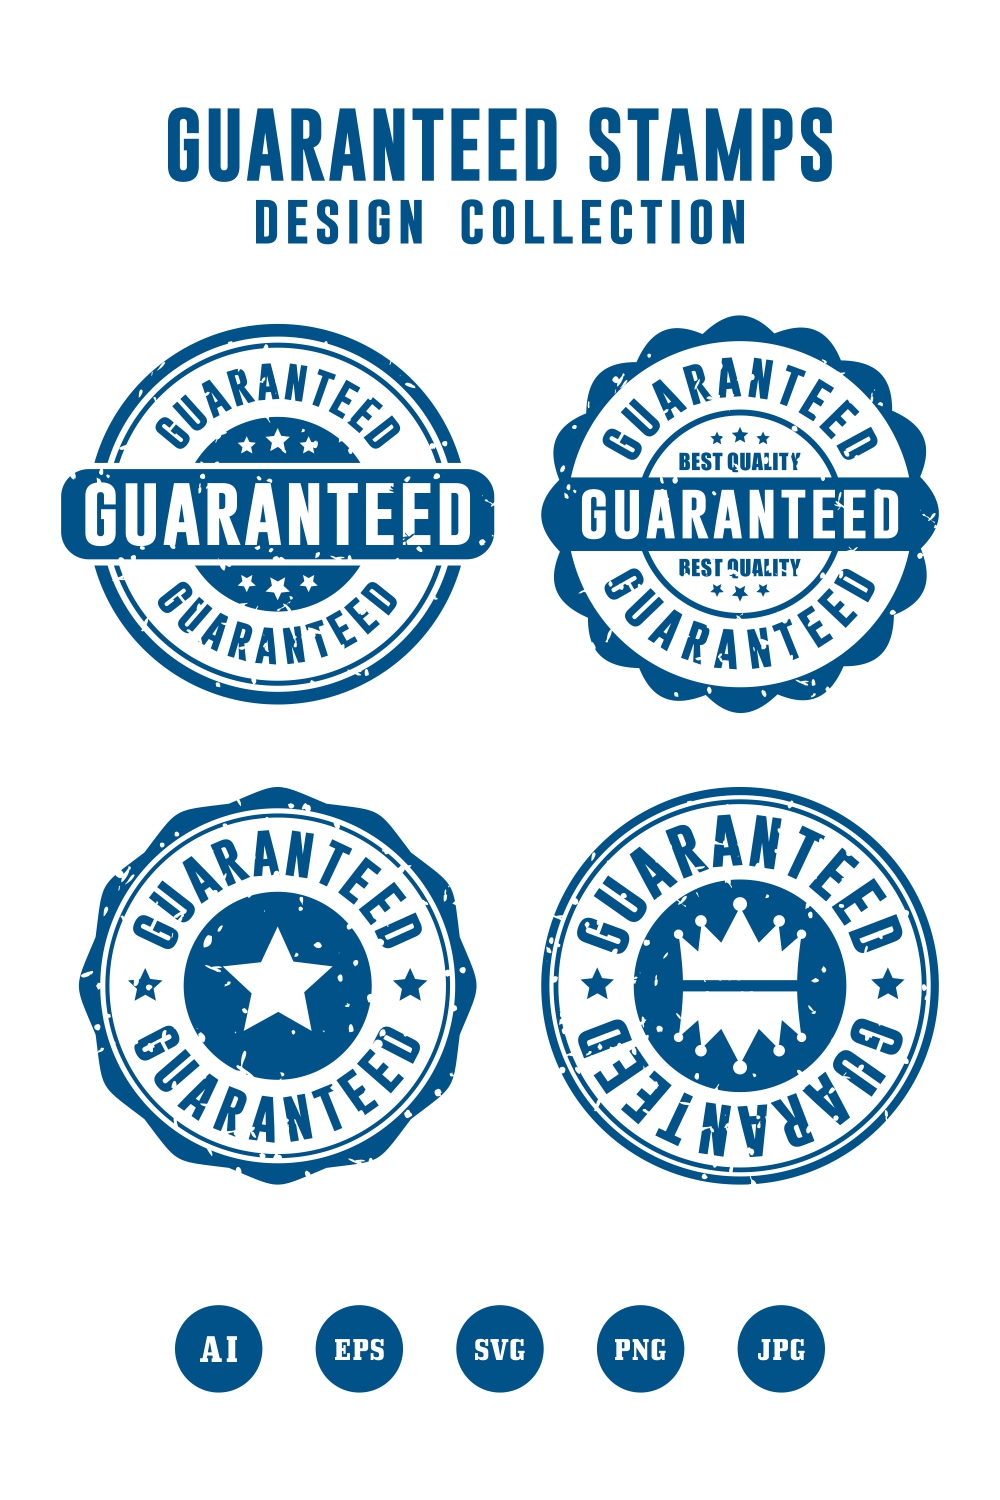 Guaranteed stamps vector design collection - $4 pinterest preview image.